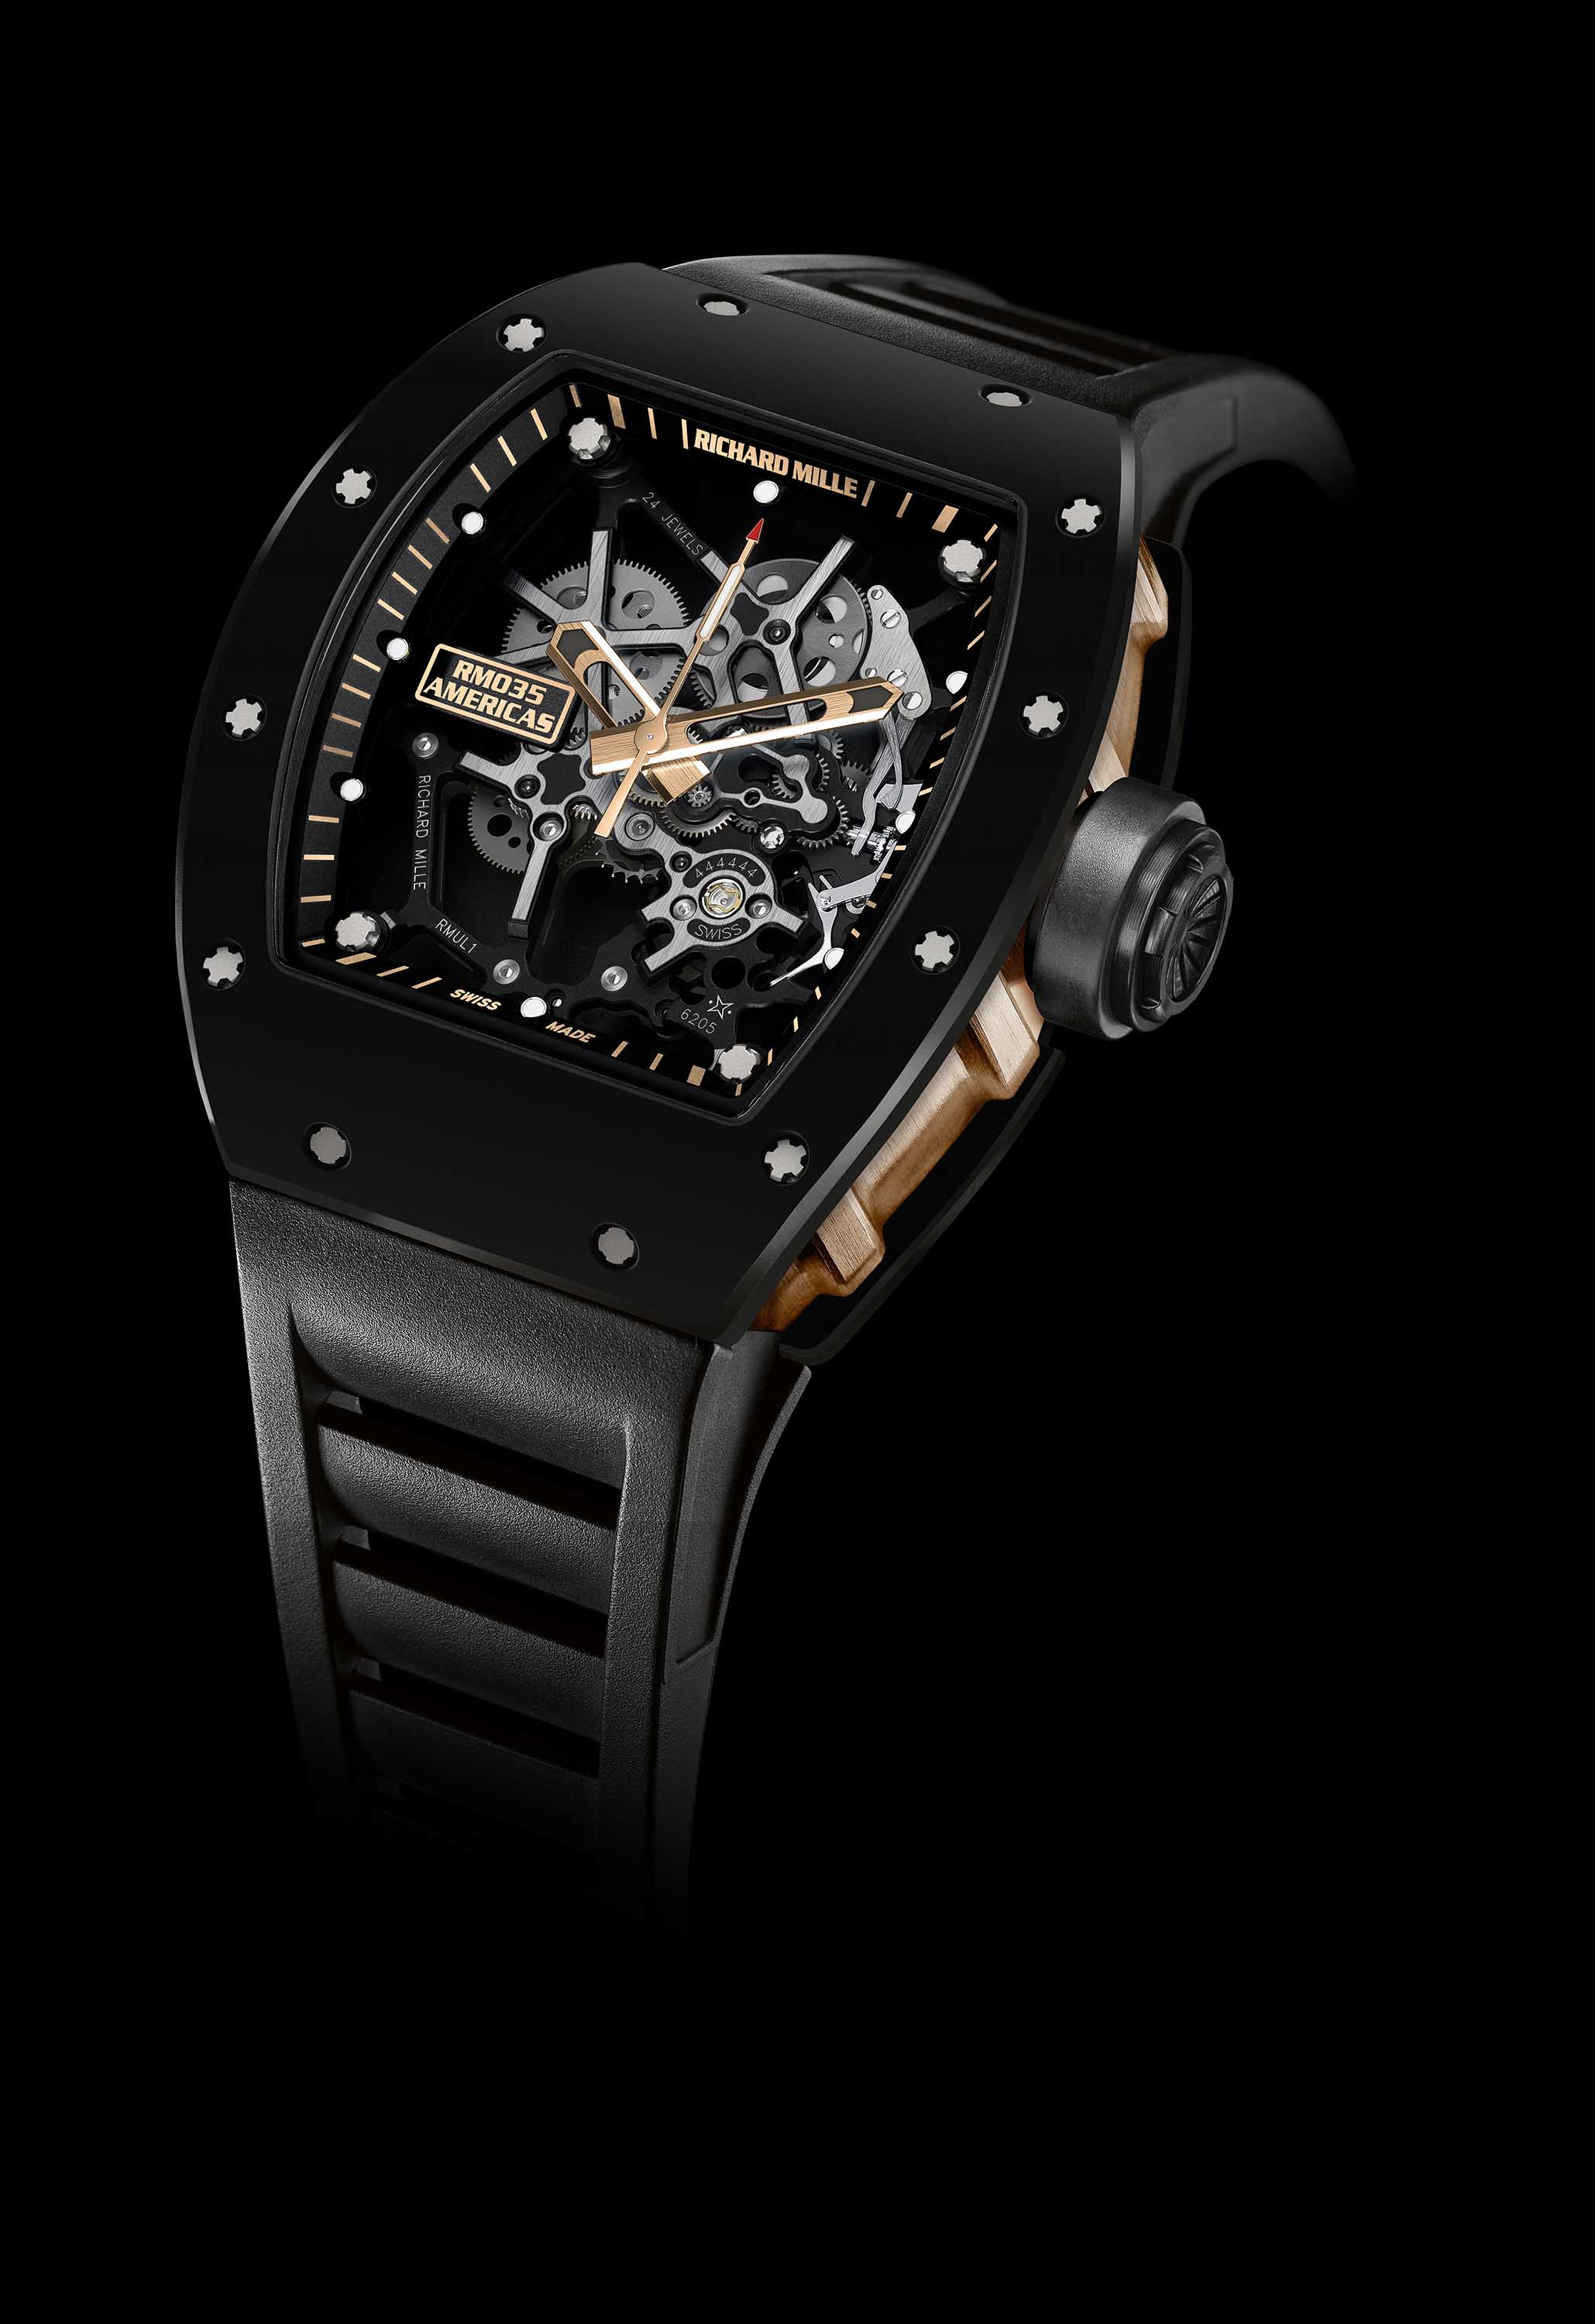 Richard Mille Pay Tribute To Rafael Nadal With Two Exclusive Limited Editions